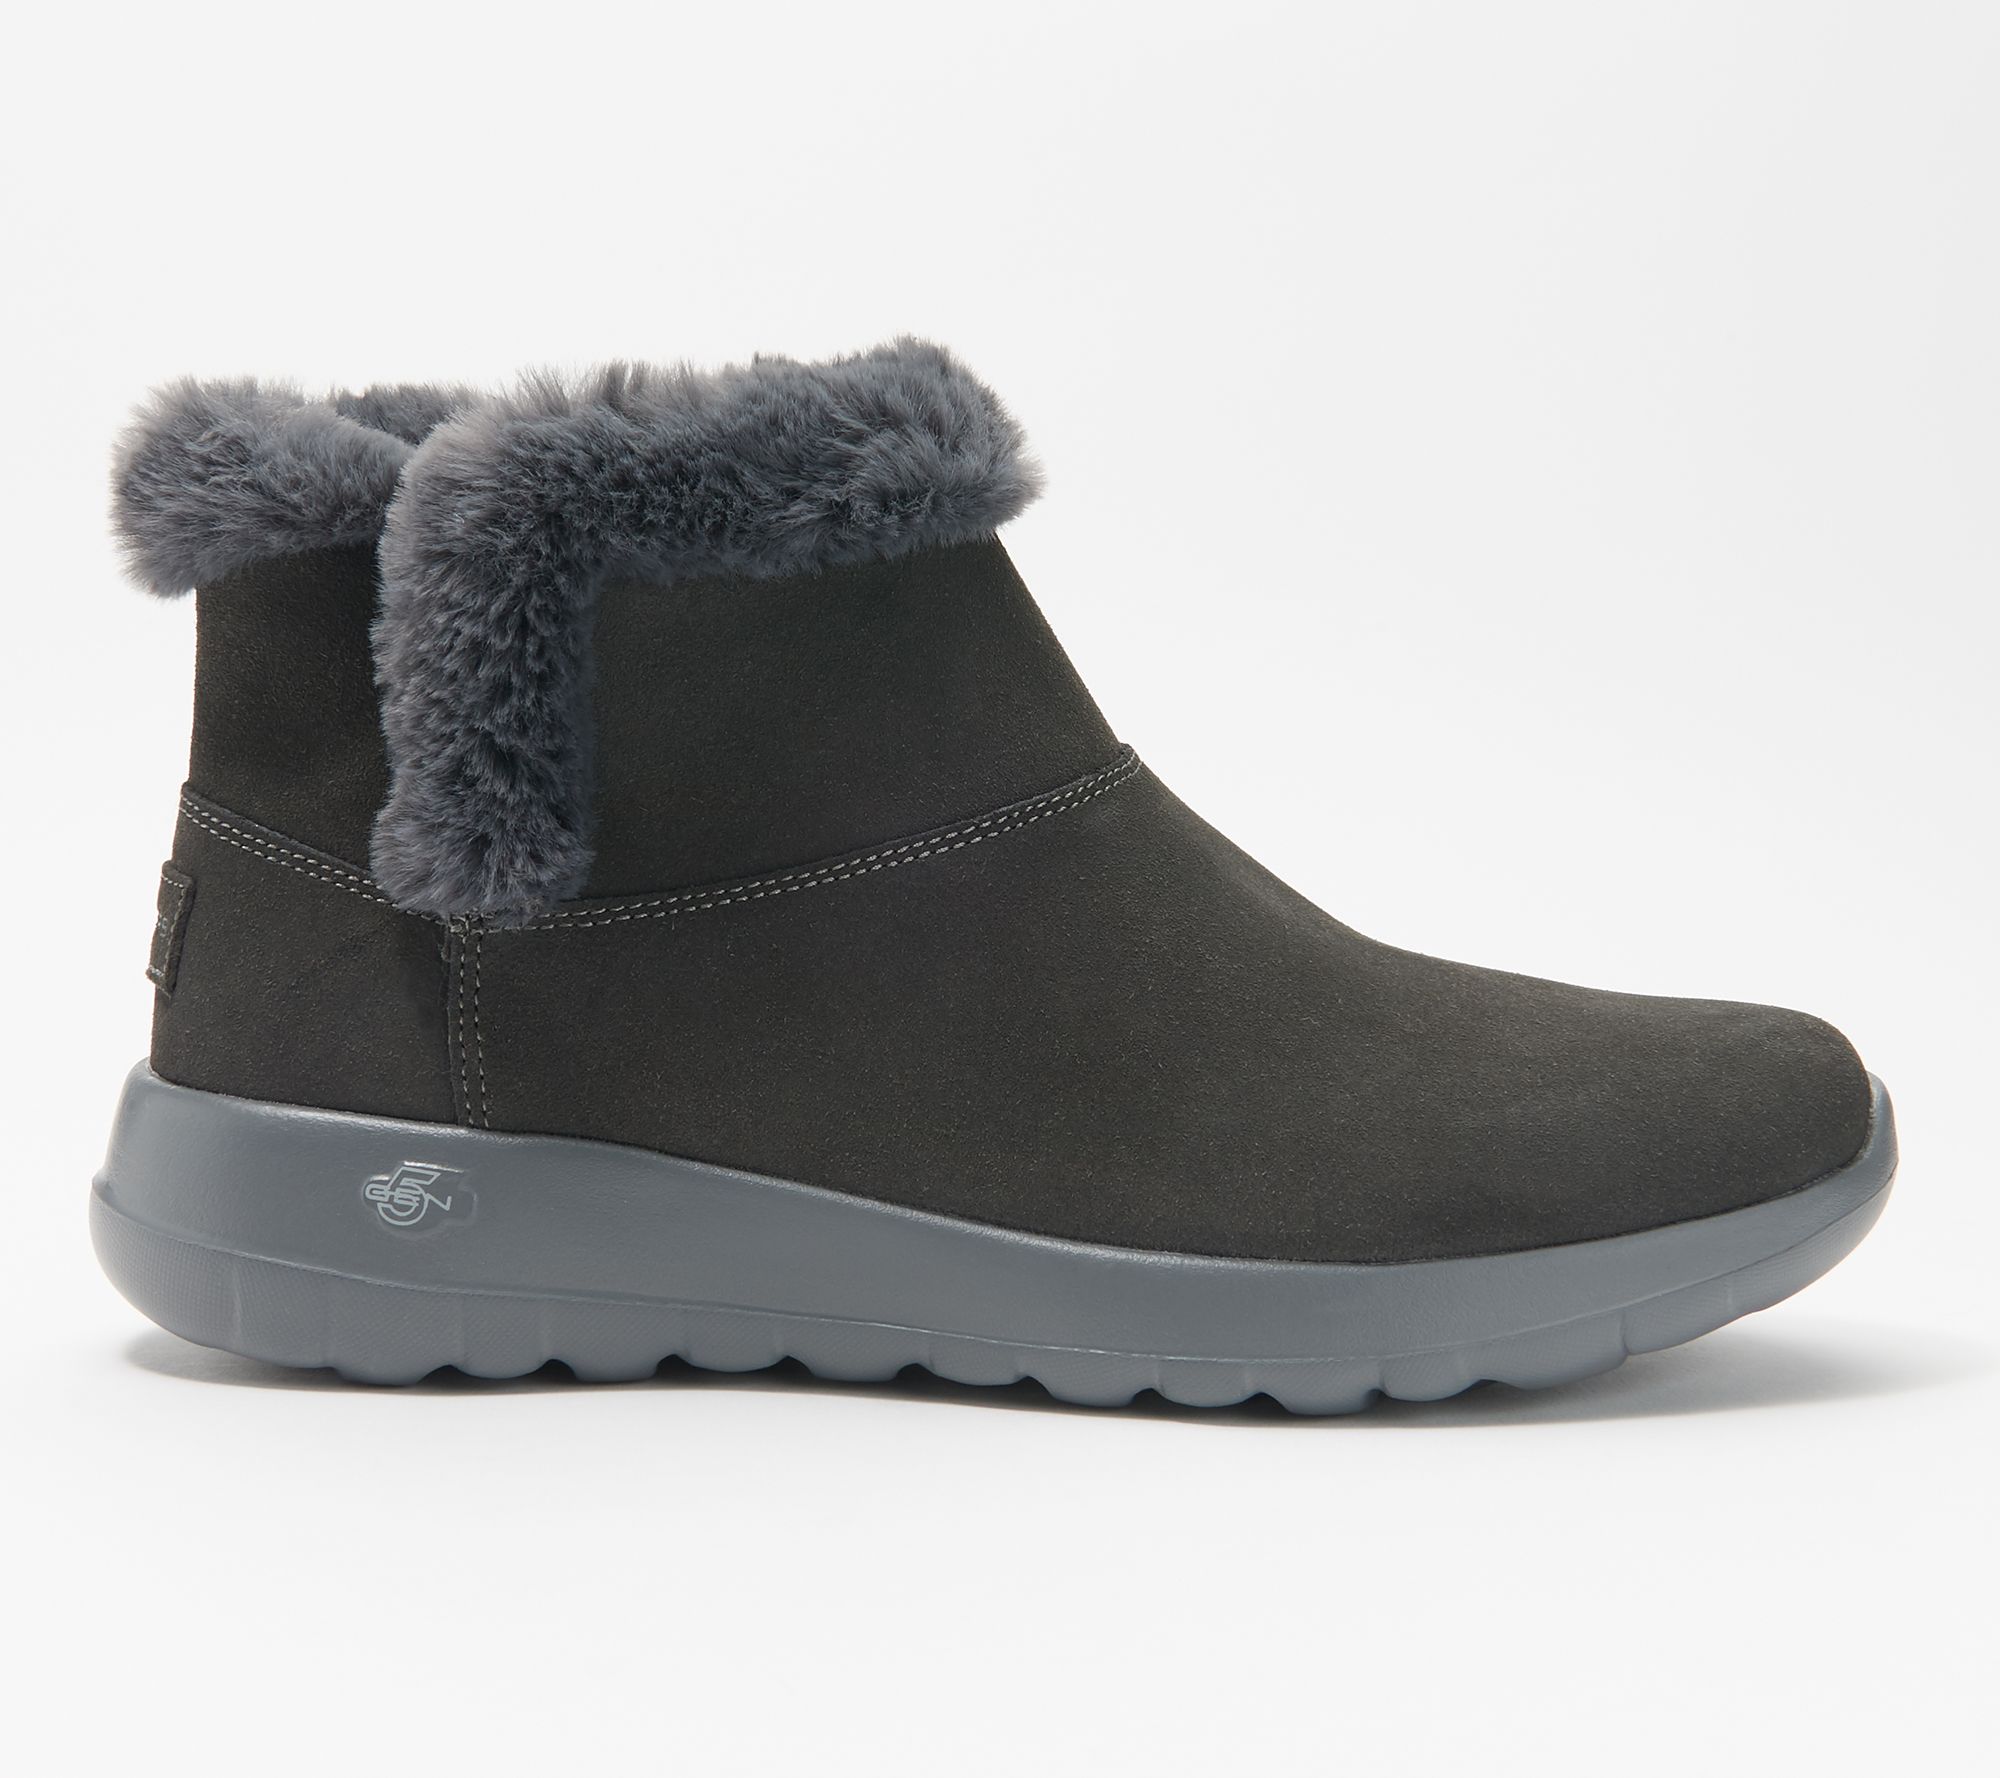 skechers on the go bundle up boots